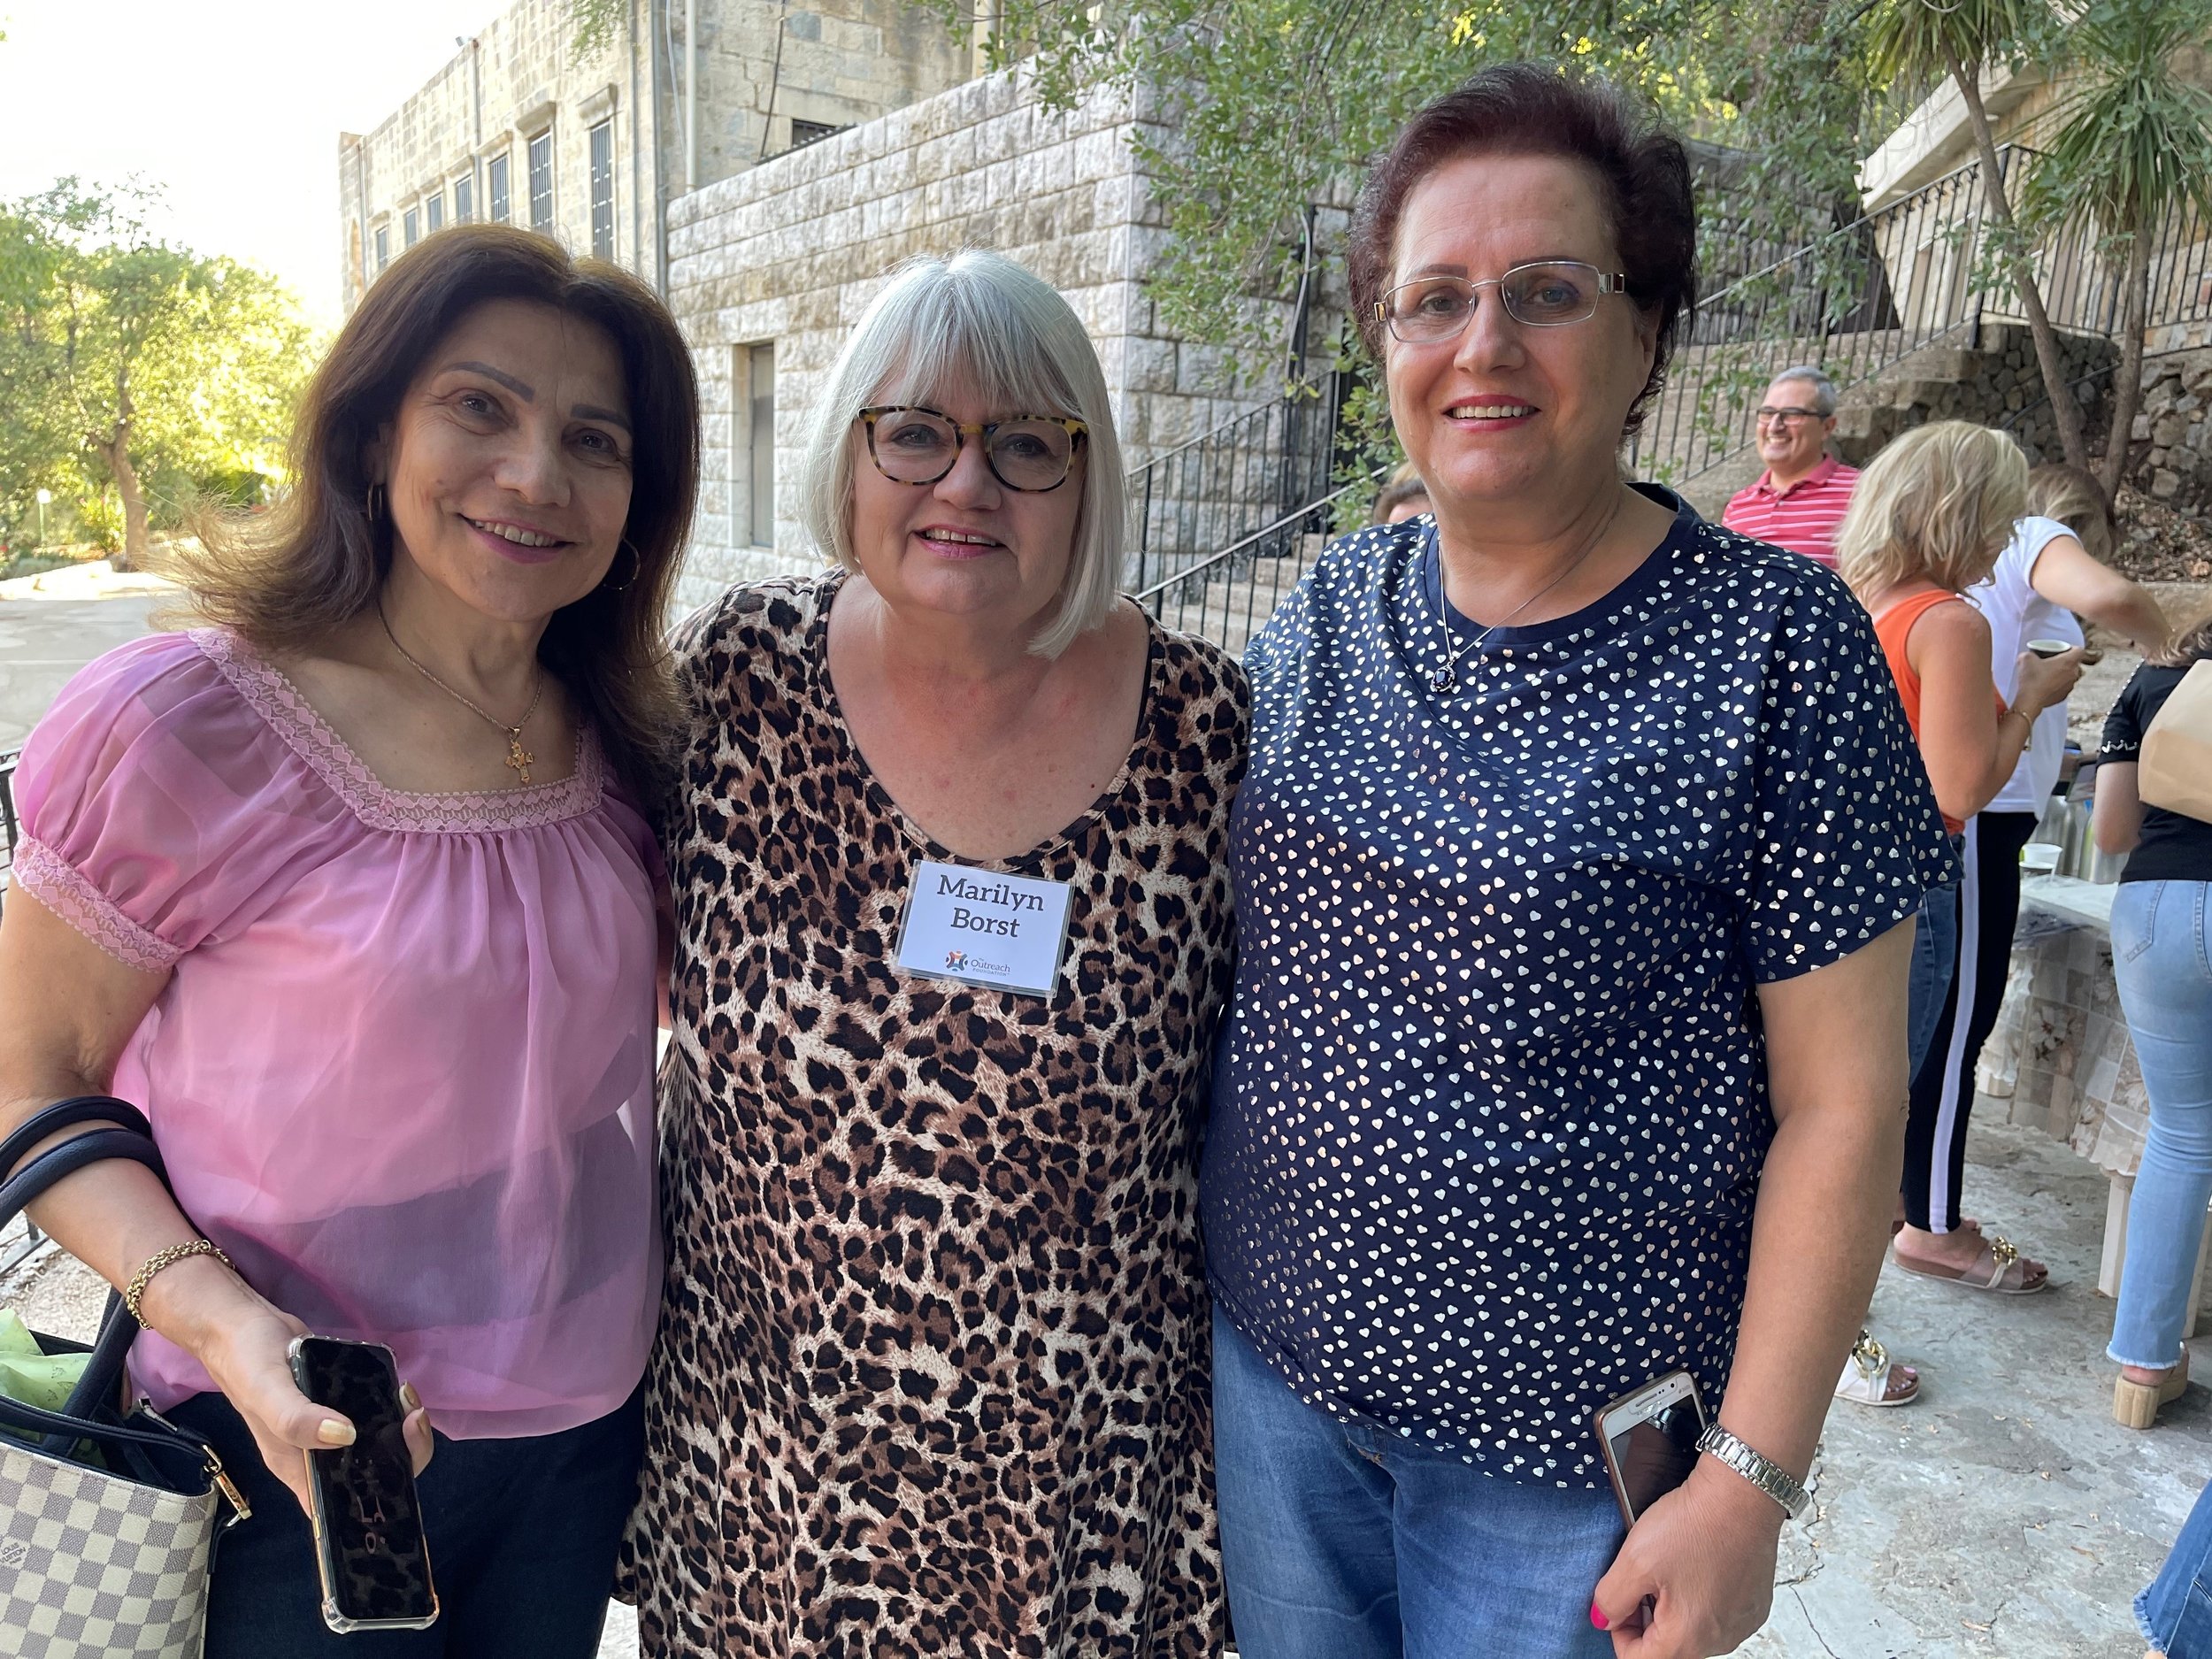   Marilyn Borst is reunited with long time friends from Damascus  